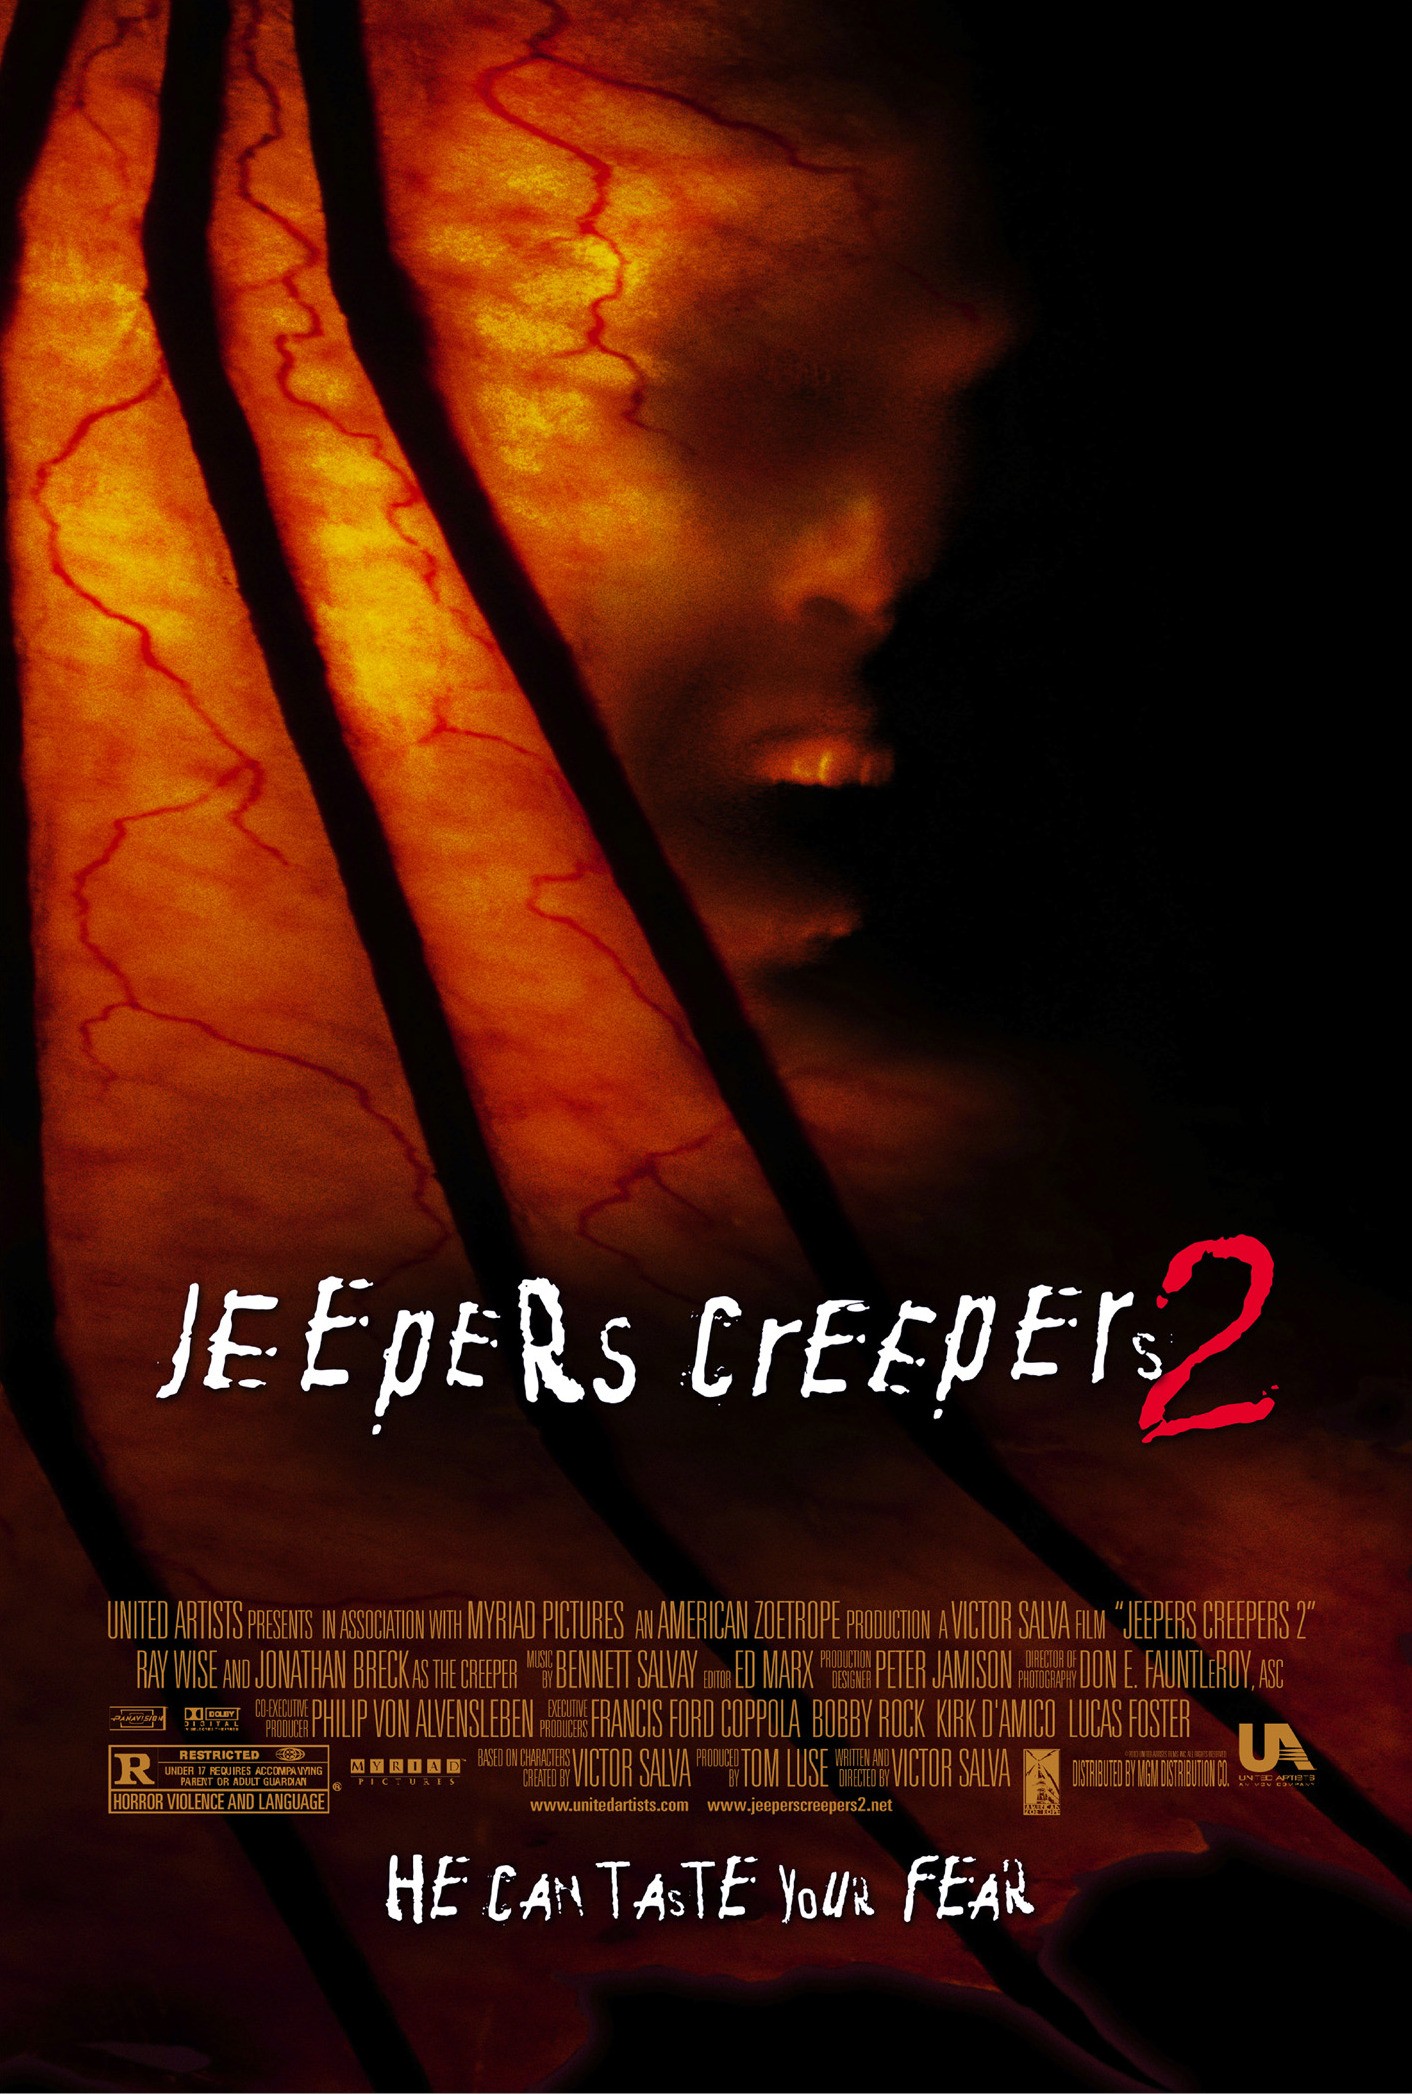 Película Jeepers Creepers